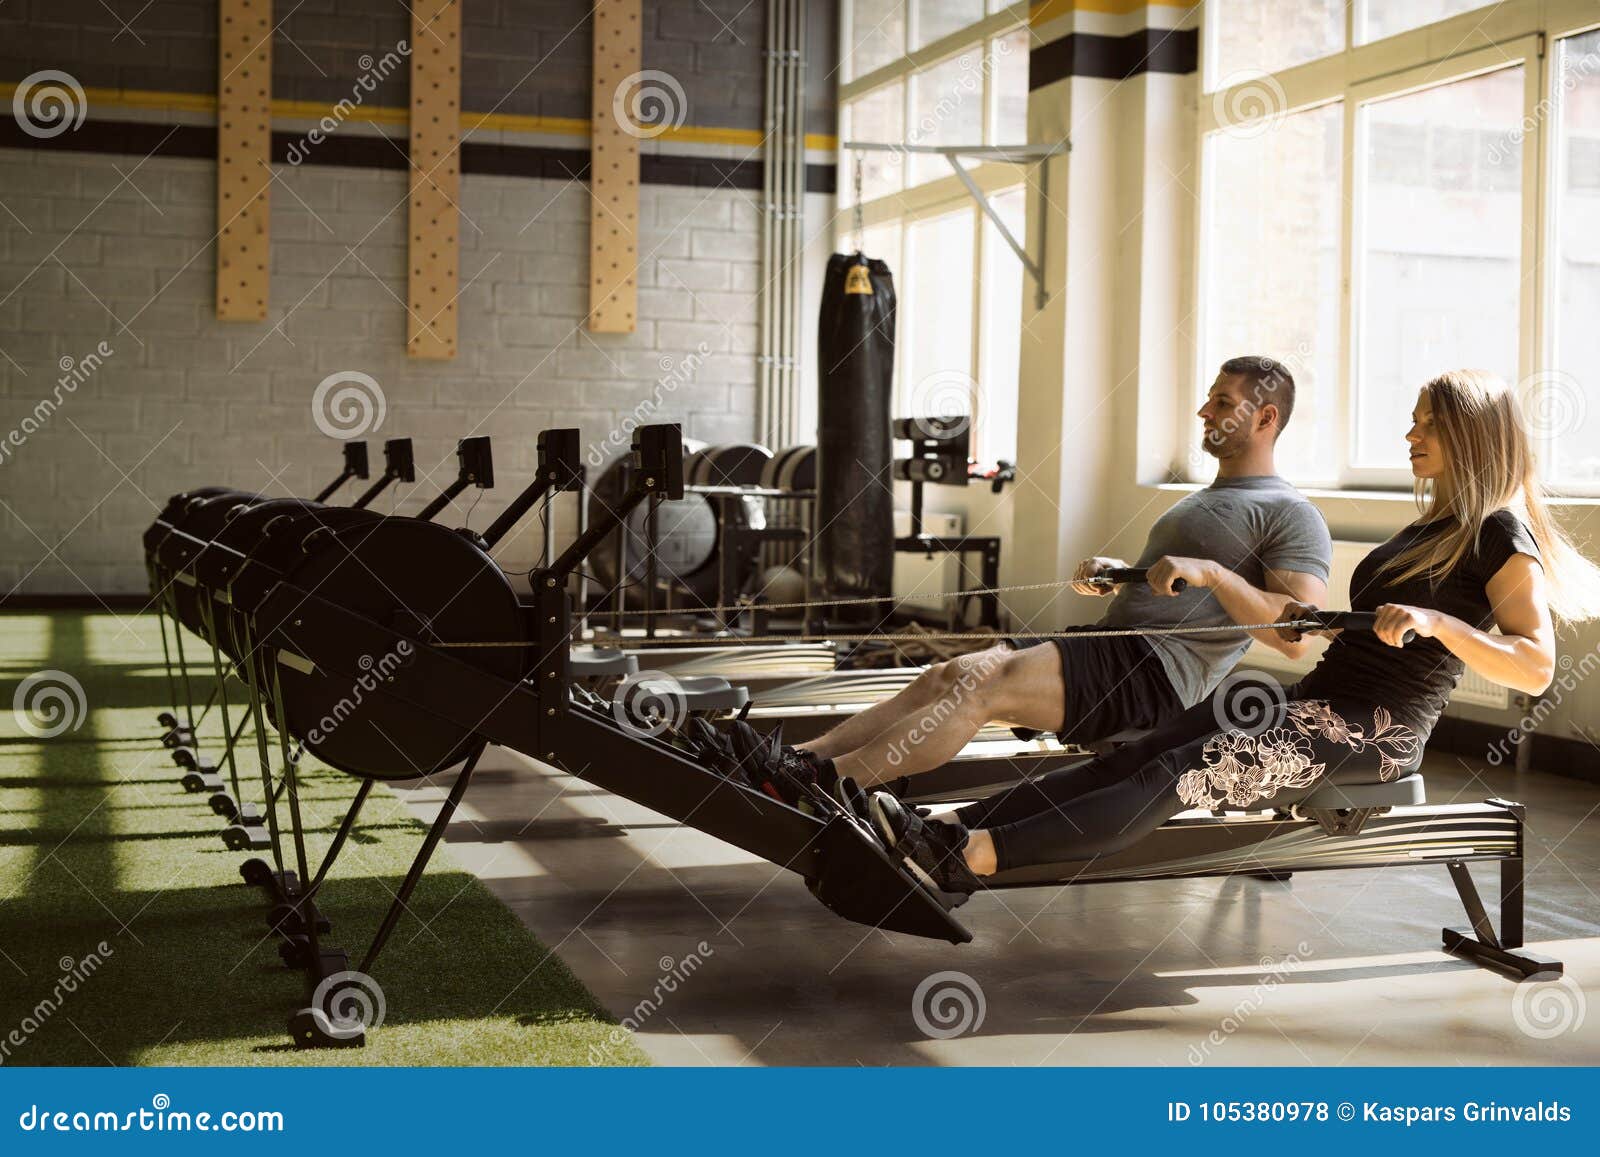 man and woman training on rowing machines in gym together